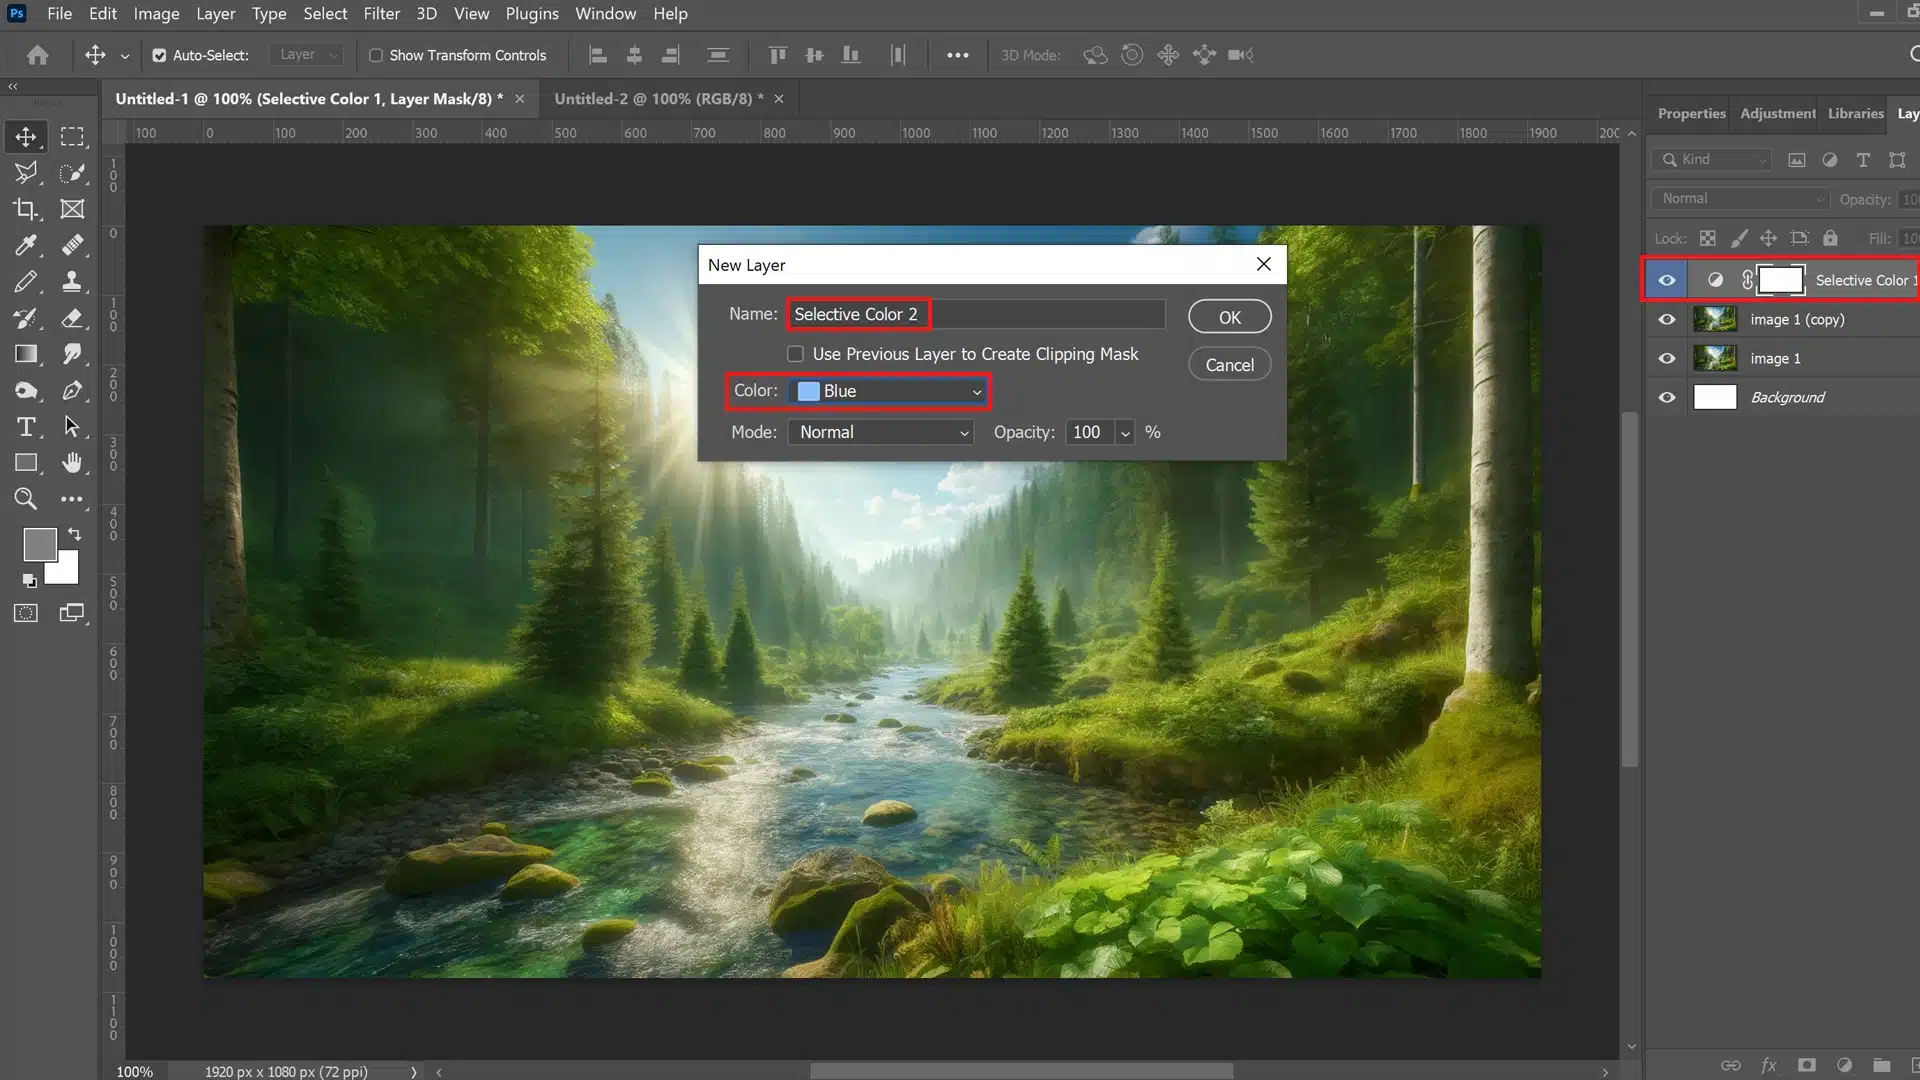 dobe Photoshop with a serene forest landscape on the canvas. The 'New Layer' dialog box is open, showing 'Selective Color 2' with the color set to blue. The Layers panel is visible, with 'Selective Color 2' highlighted.